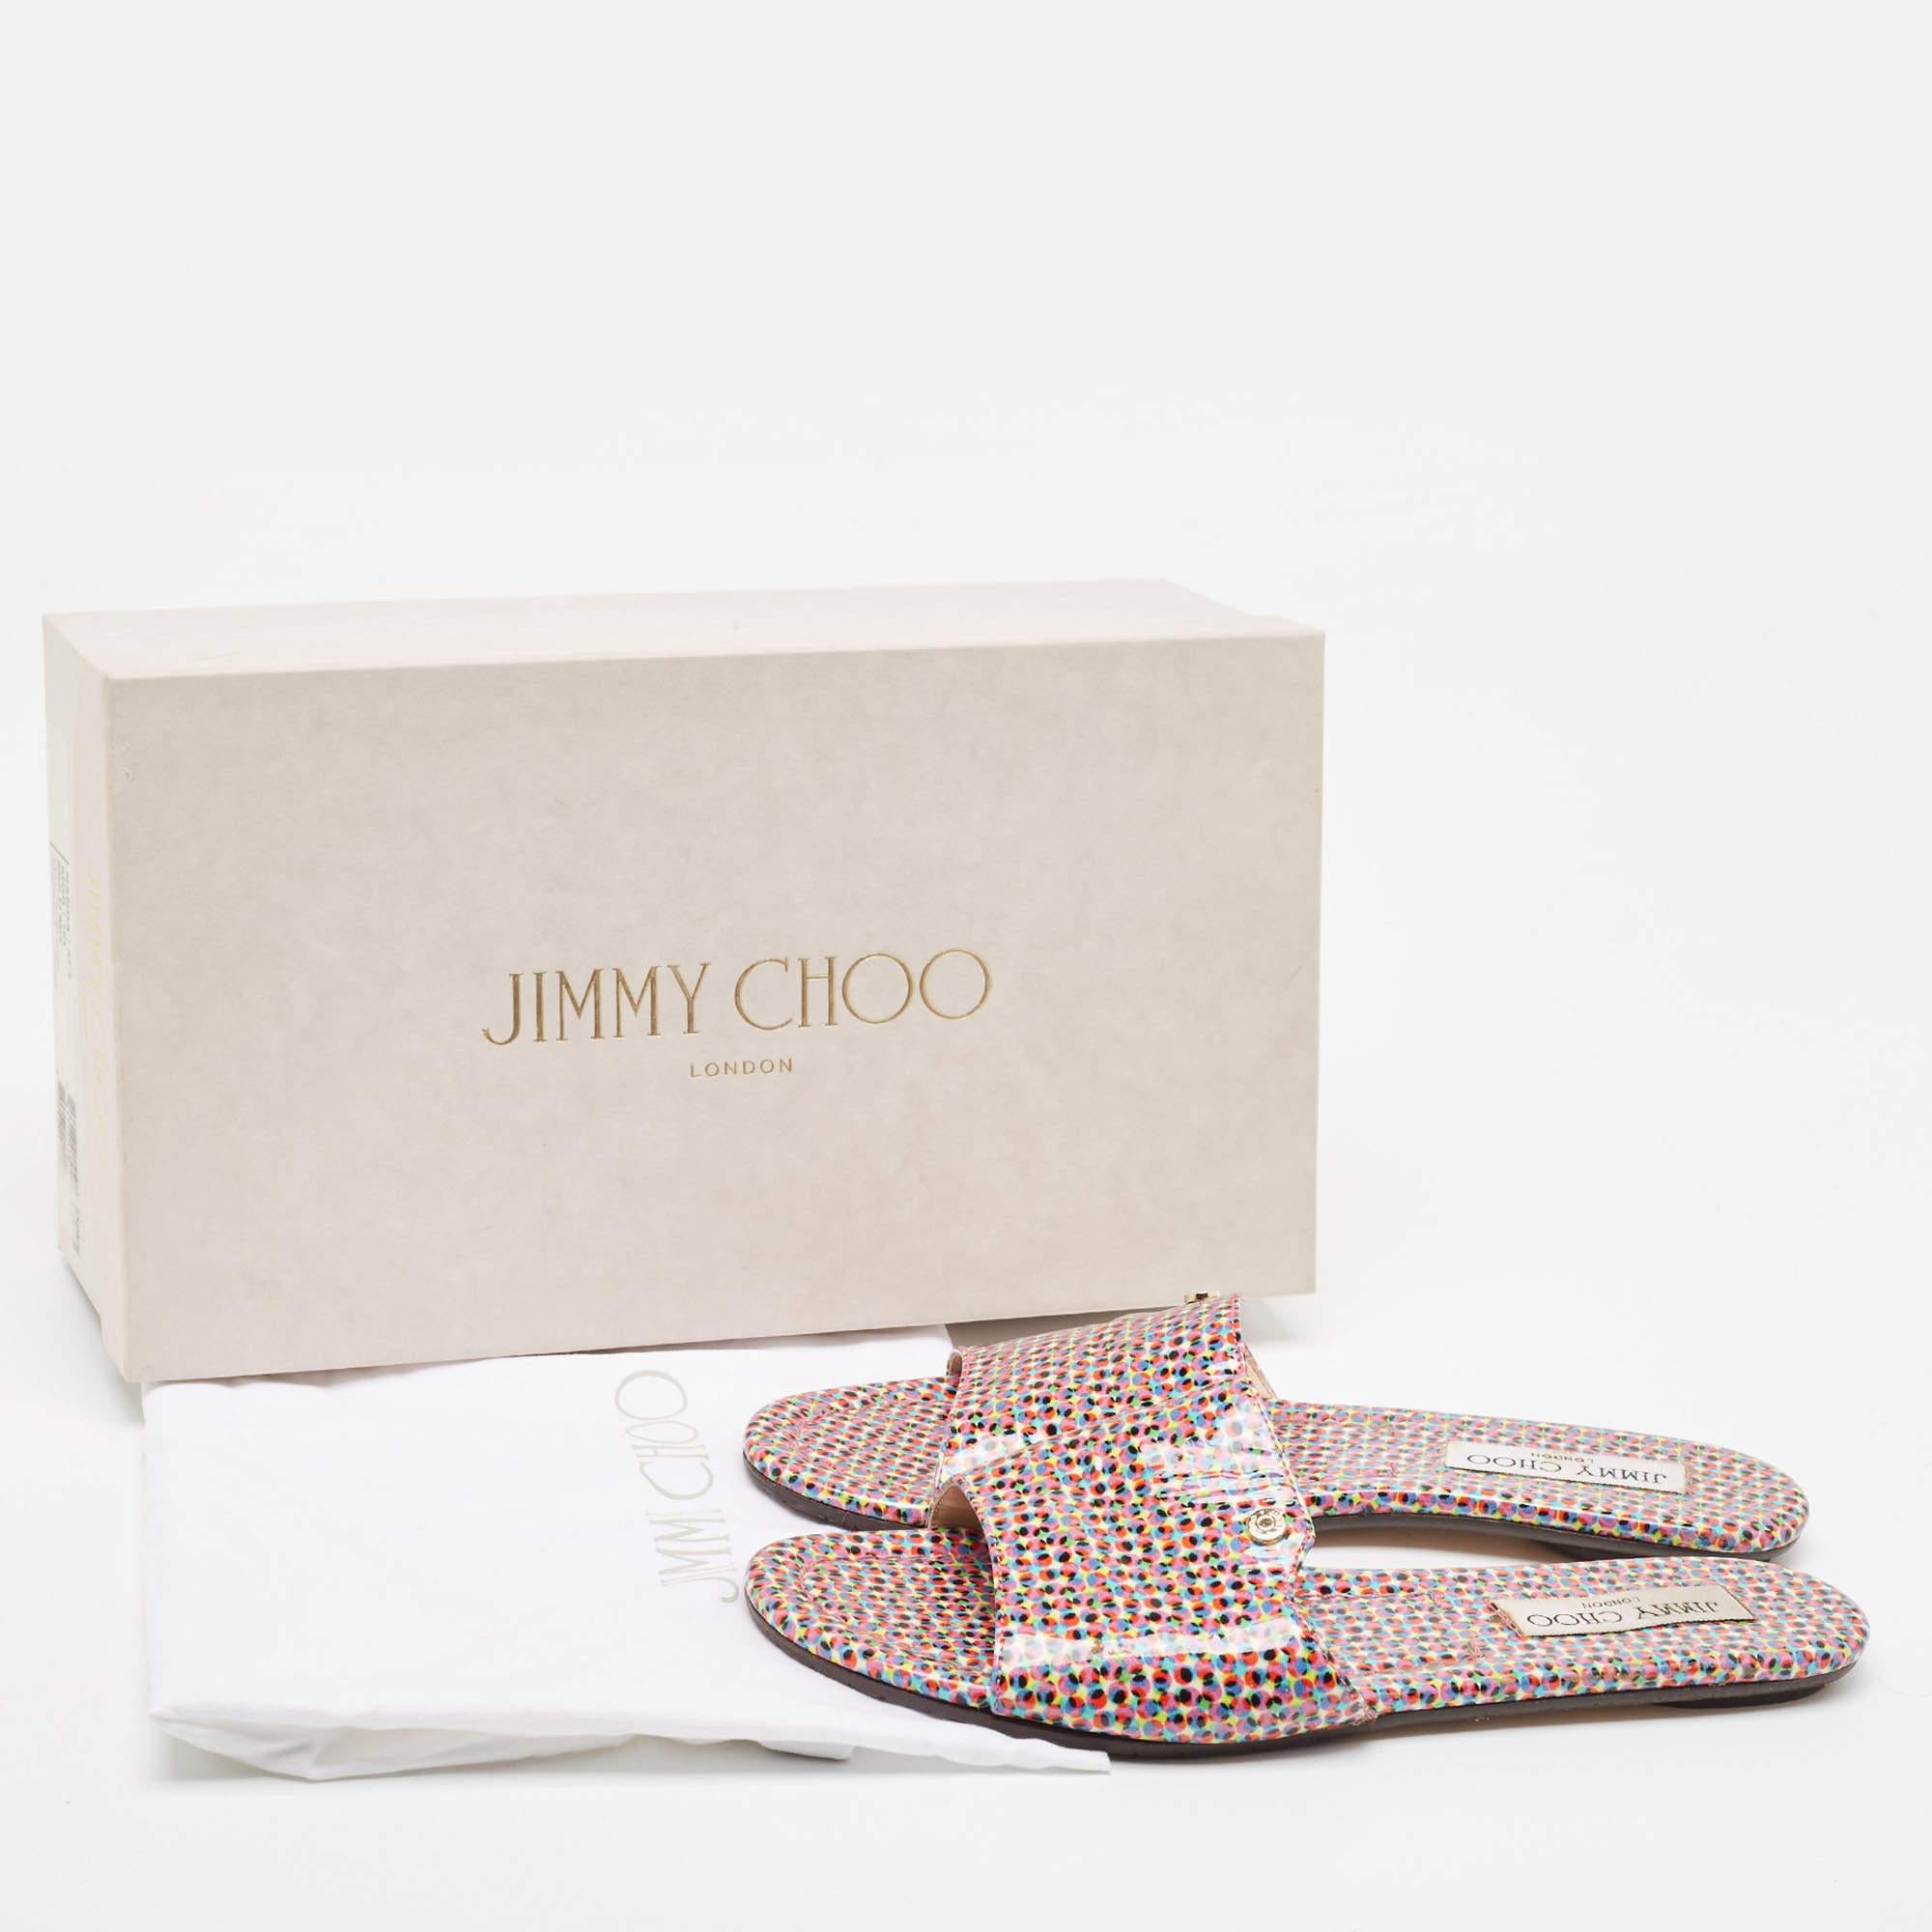 Jimmy Choo Multicolor Printed Patent Leather Nanda Flats Size 37.5 For Sale 5